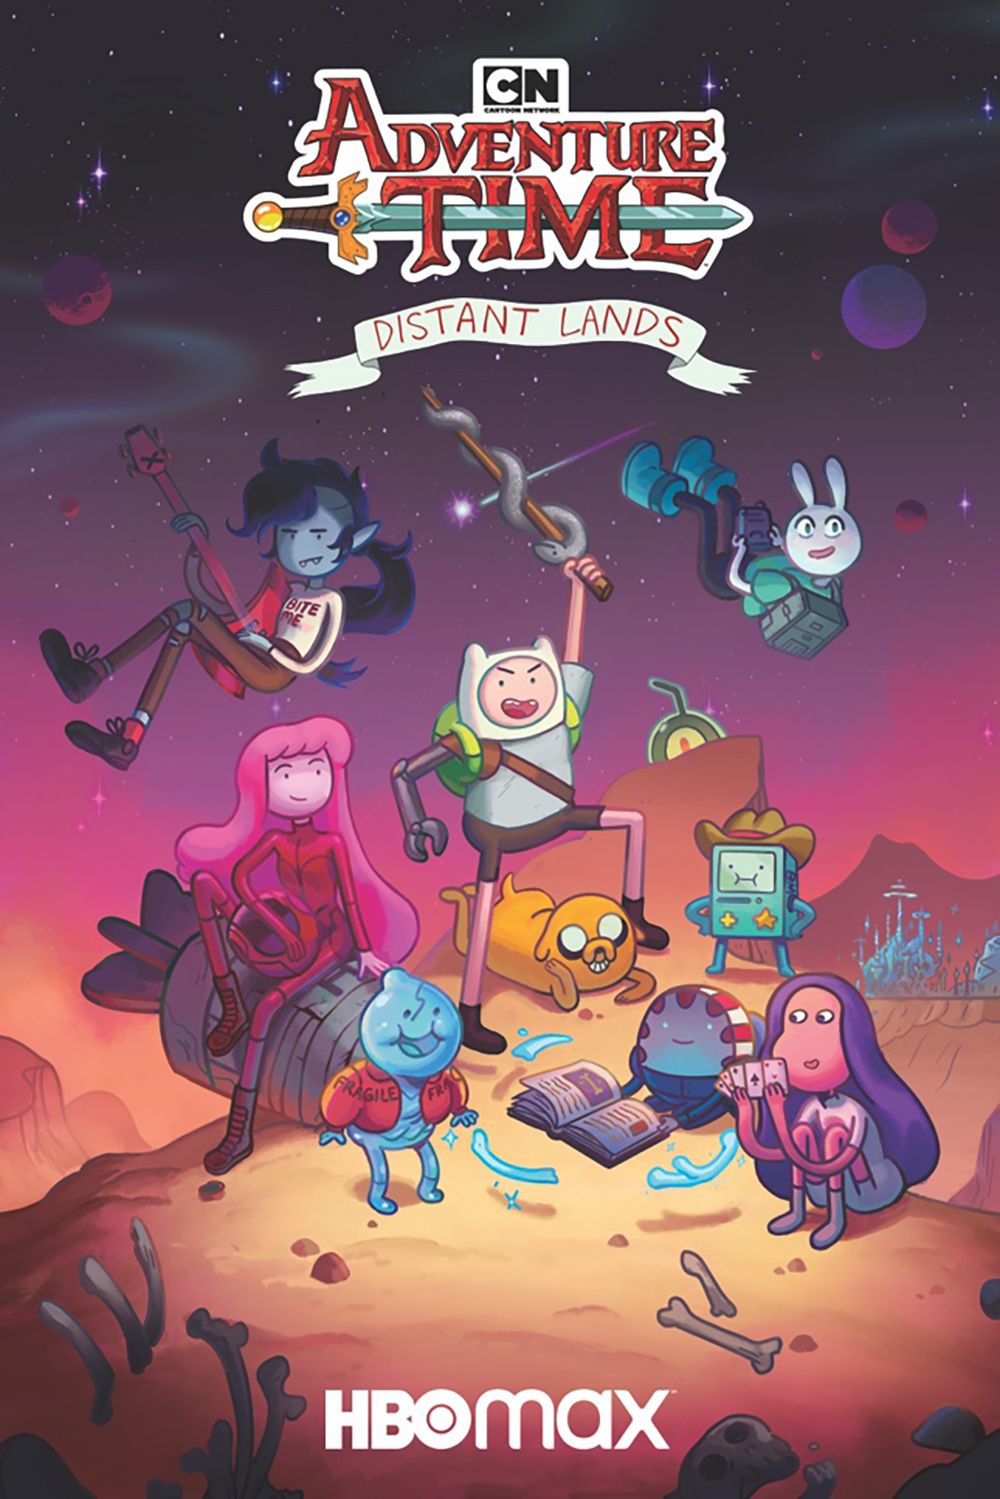 Adventure Time HBO Max Distant Lands